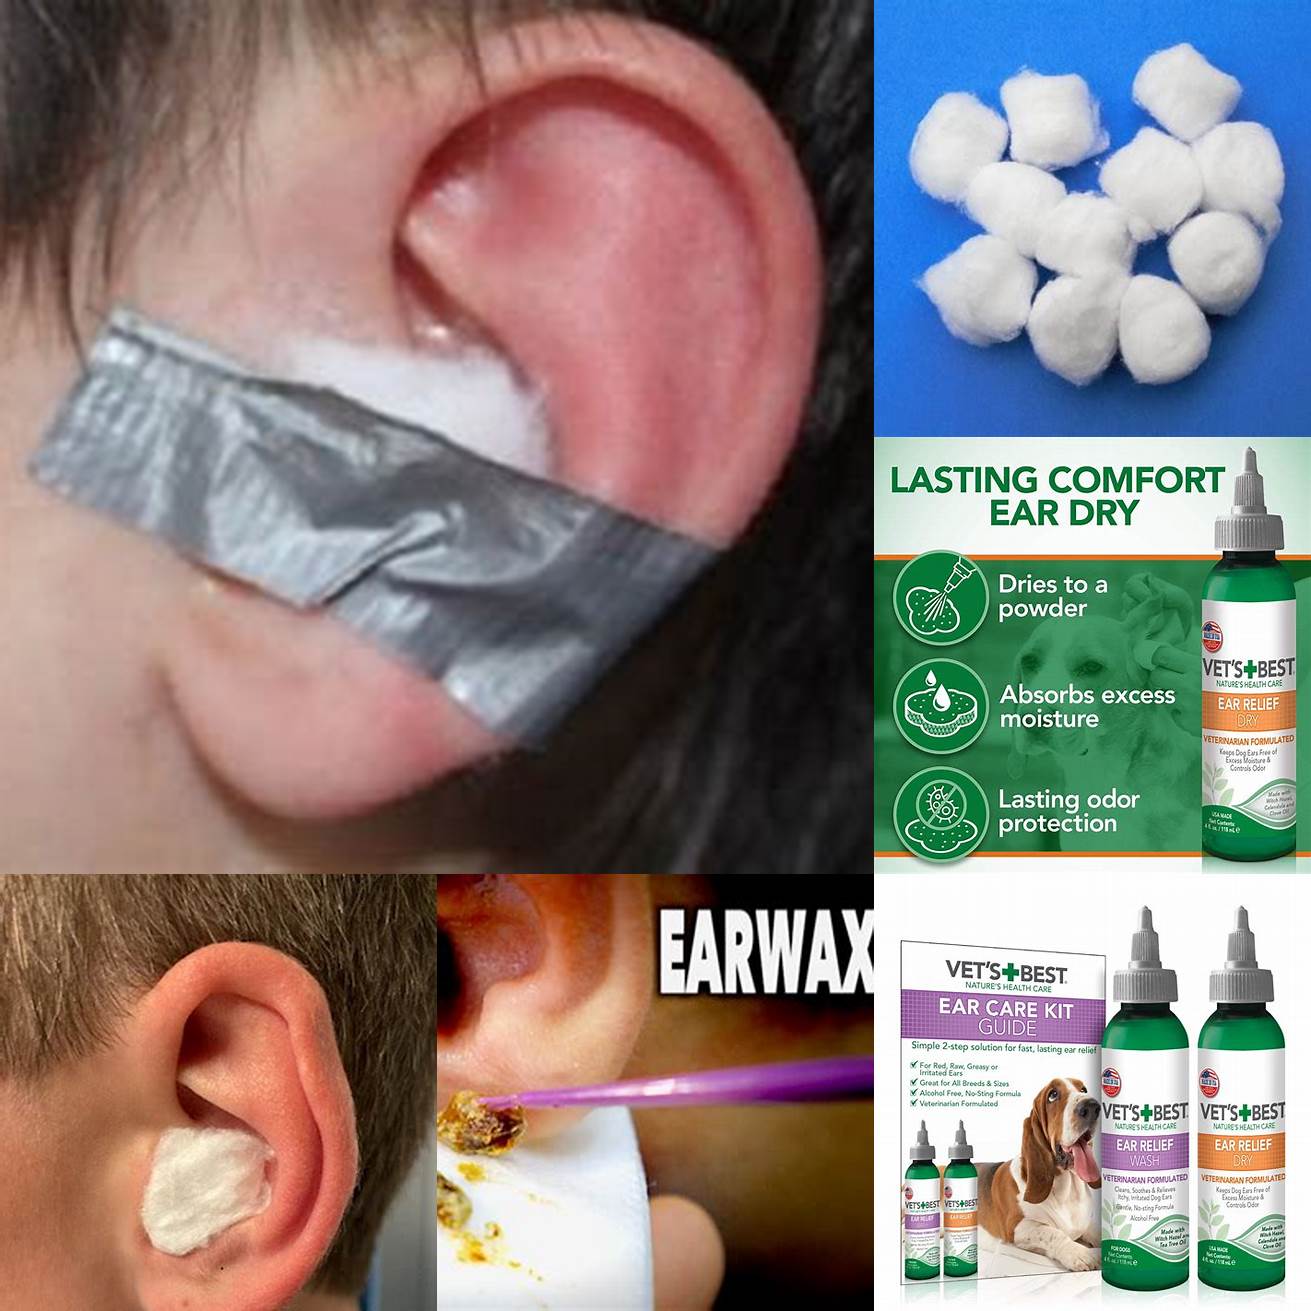 Use a dry cotton ball or cloth to dry the ear thoroughly